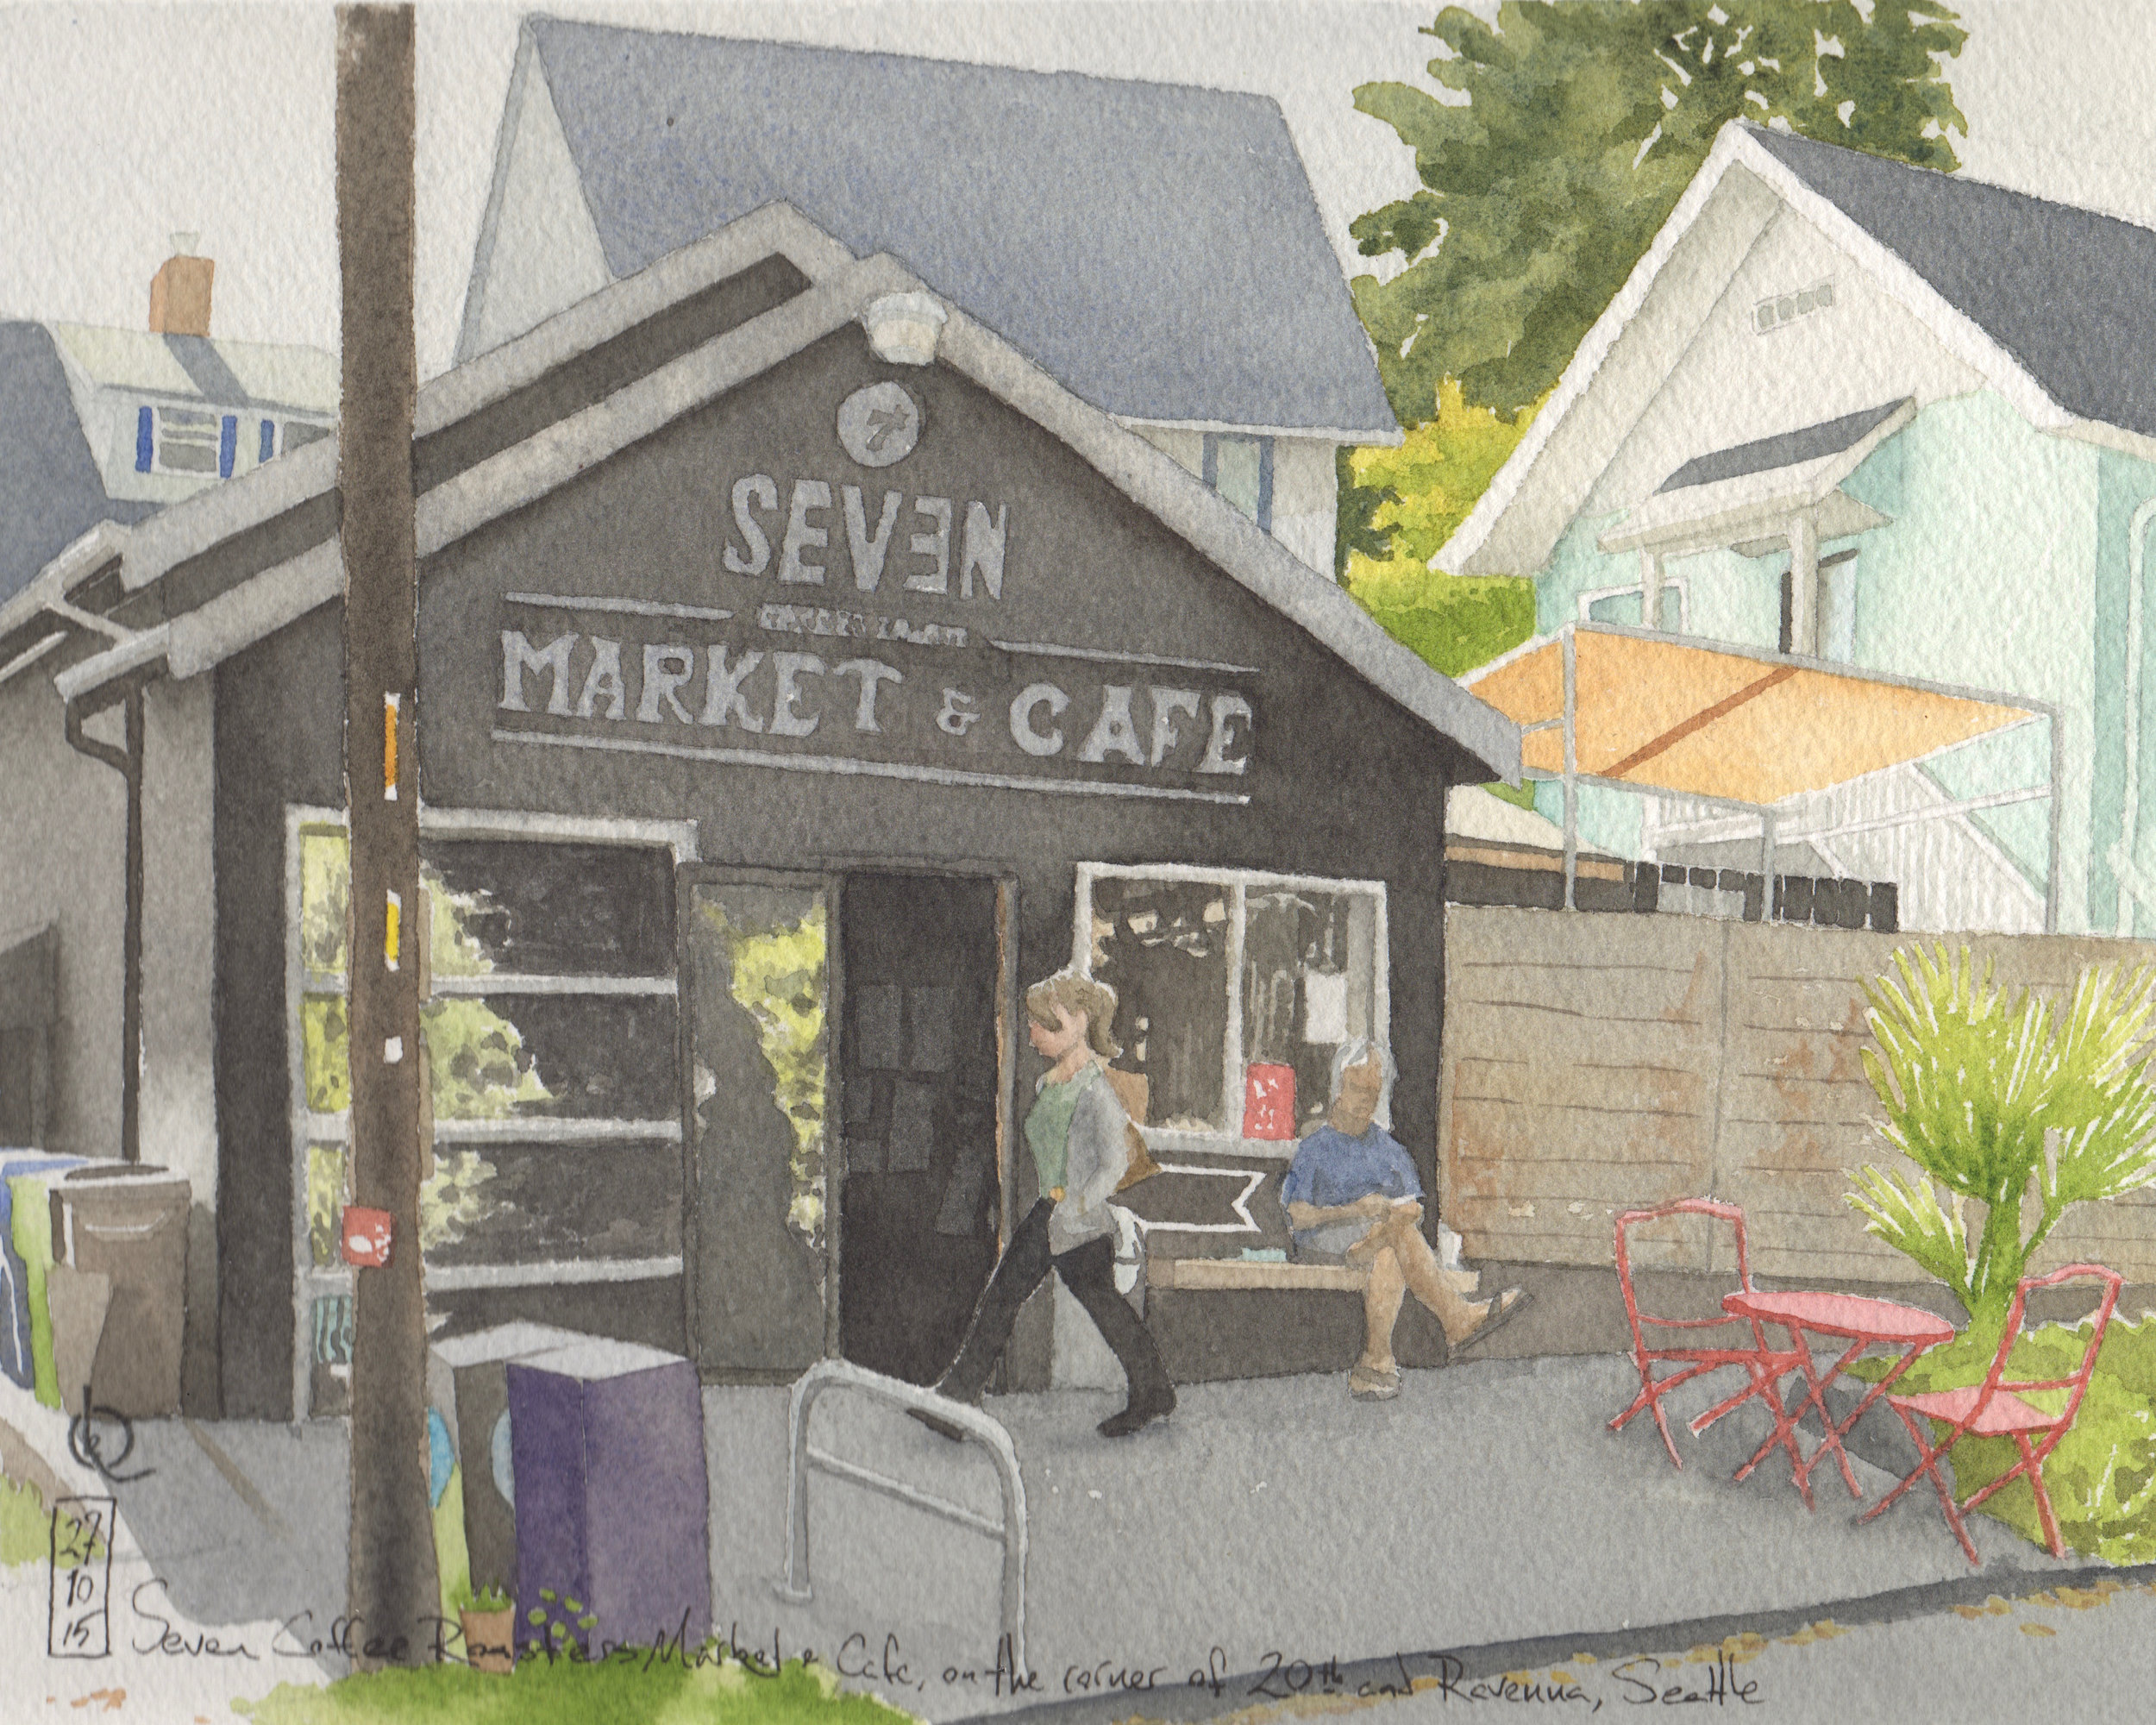 Seven Coffee Roasters Market &amp; Cafe, on the corner of 20th and Ravenna, Seattle